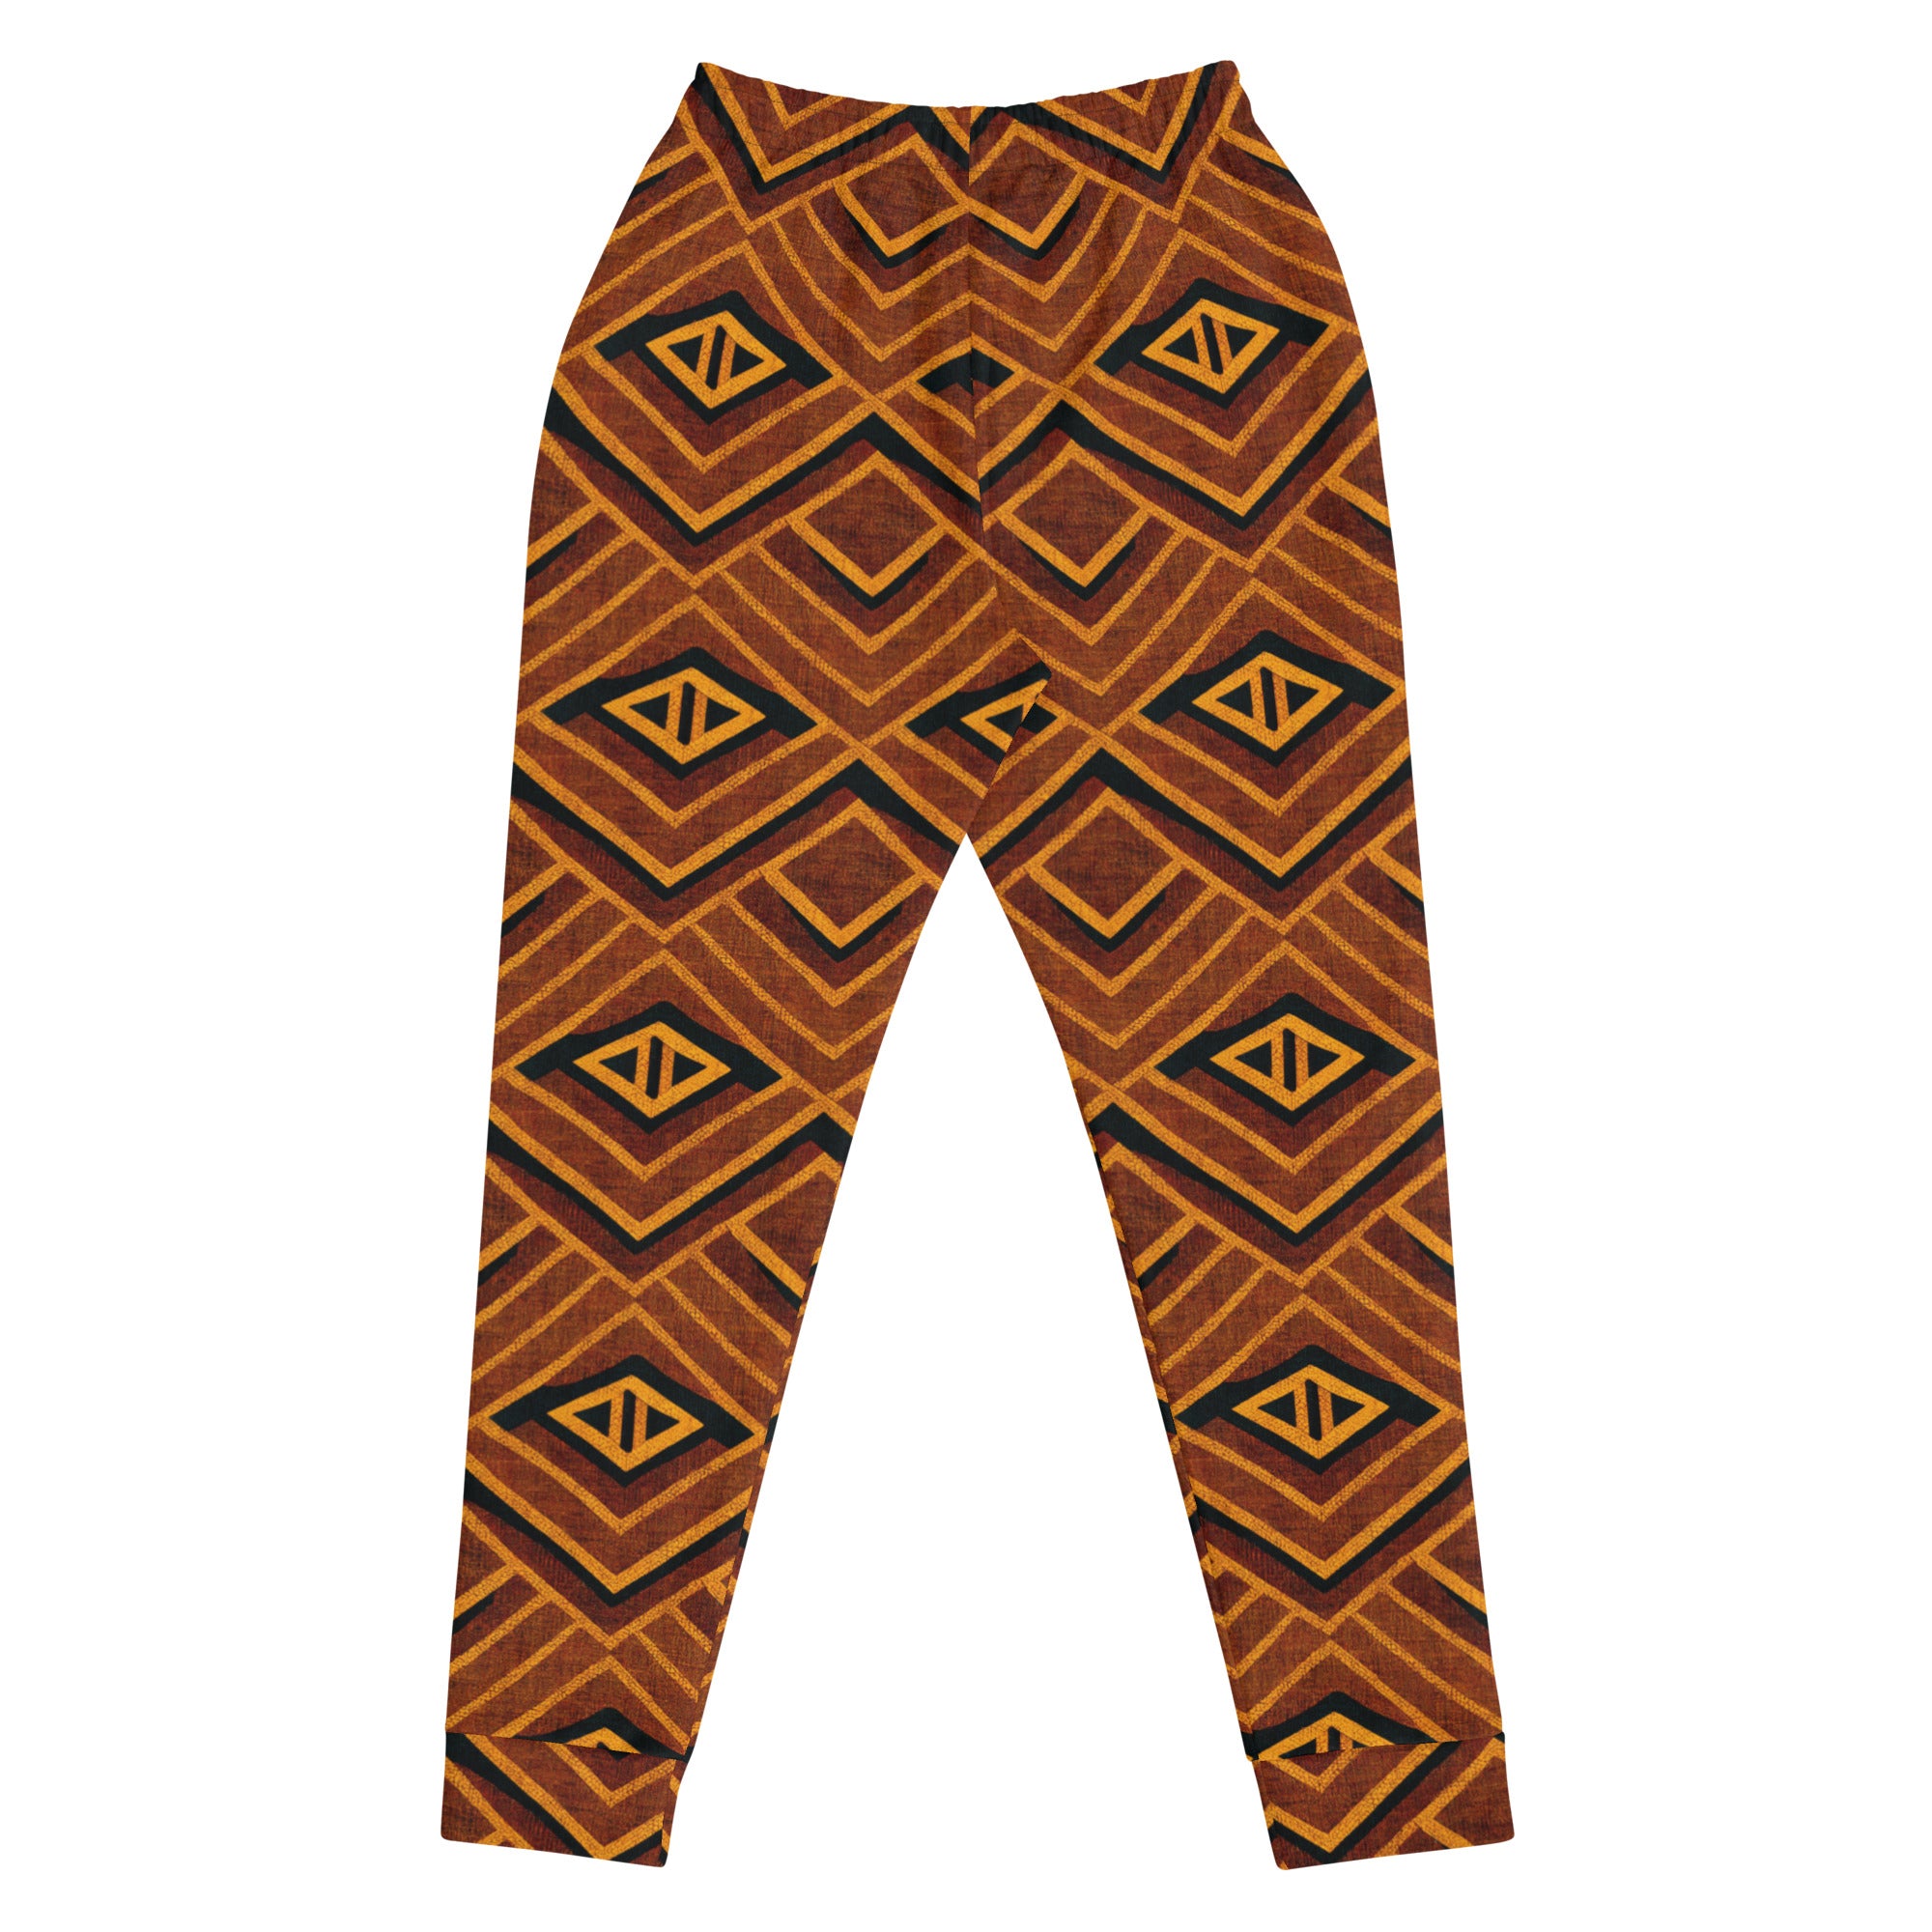 Back to Africa Women's Joggers